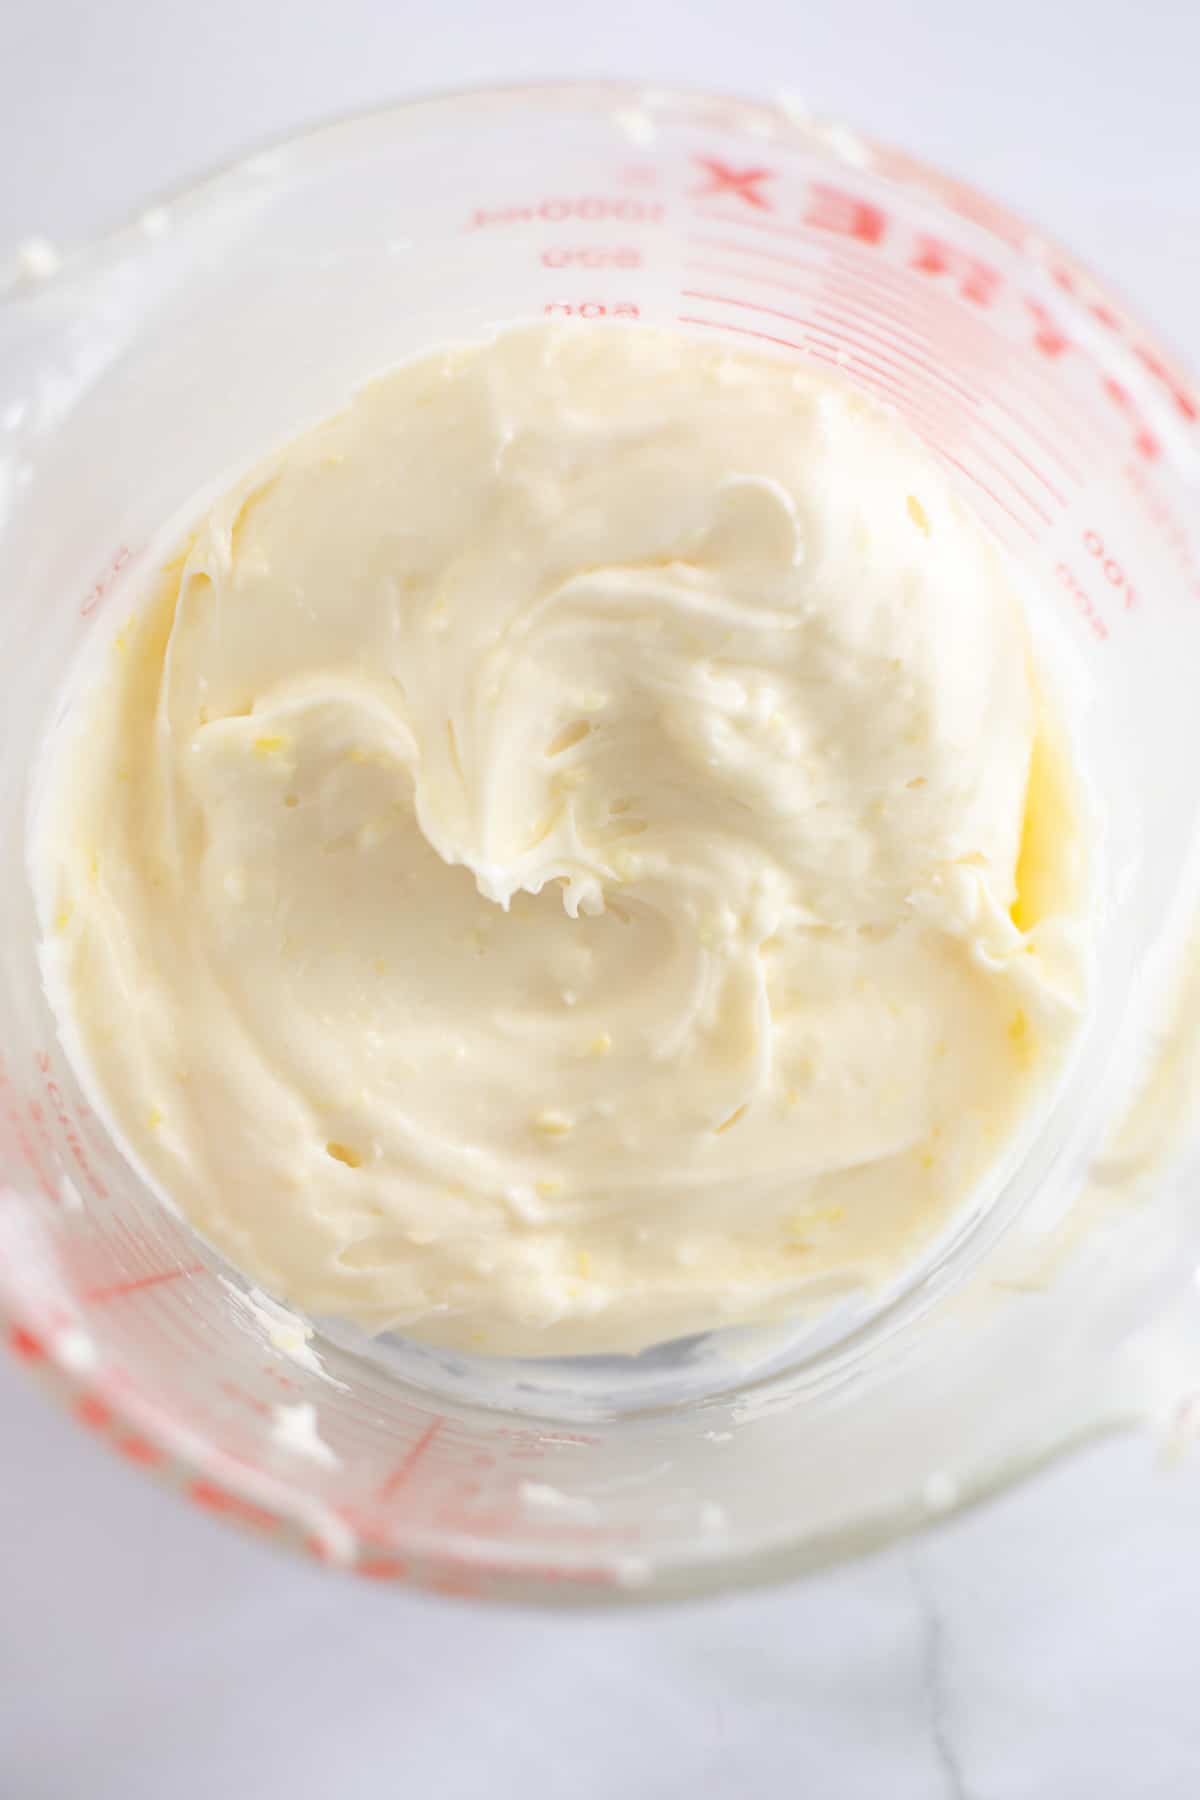 cream cheese frosting with lemon zest in a glass measuring cup.